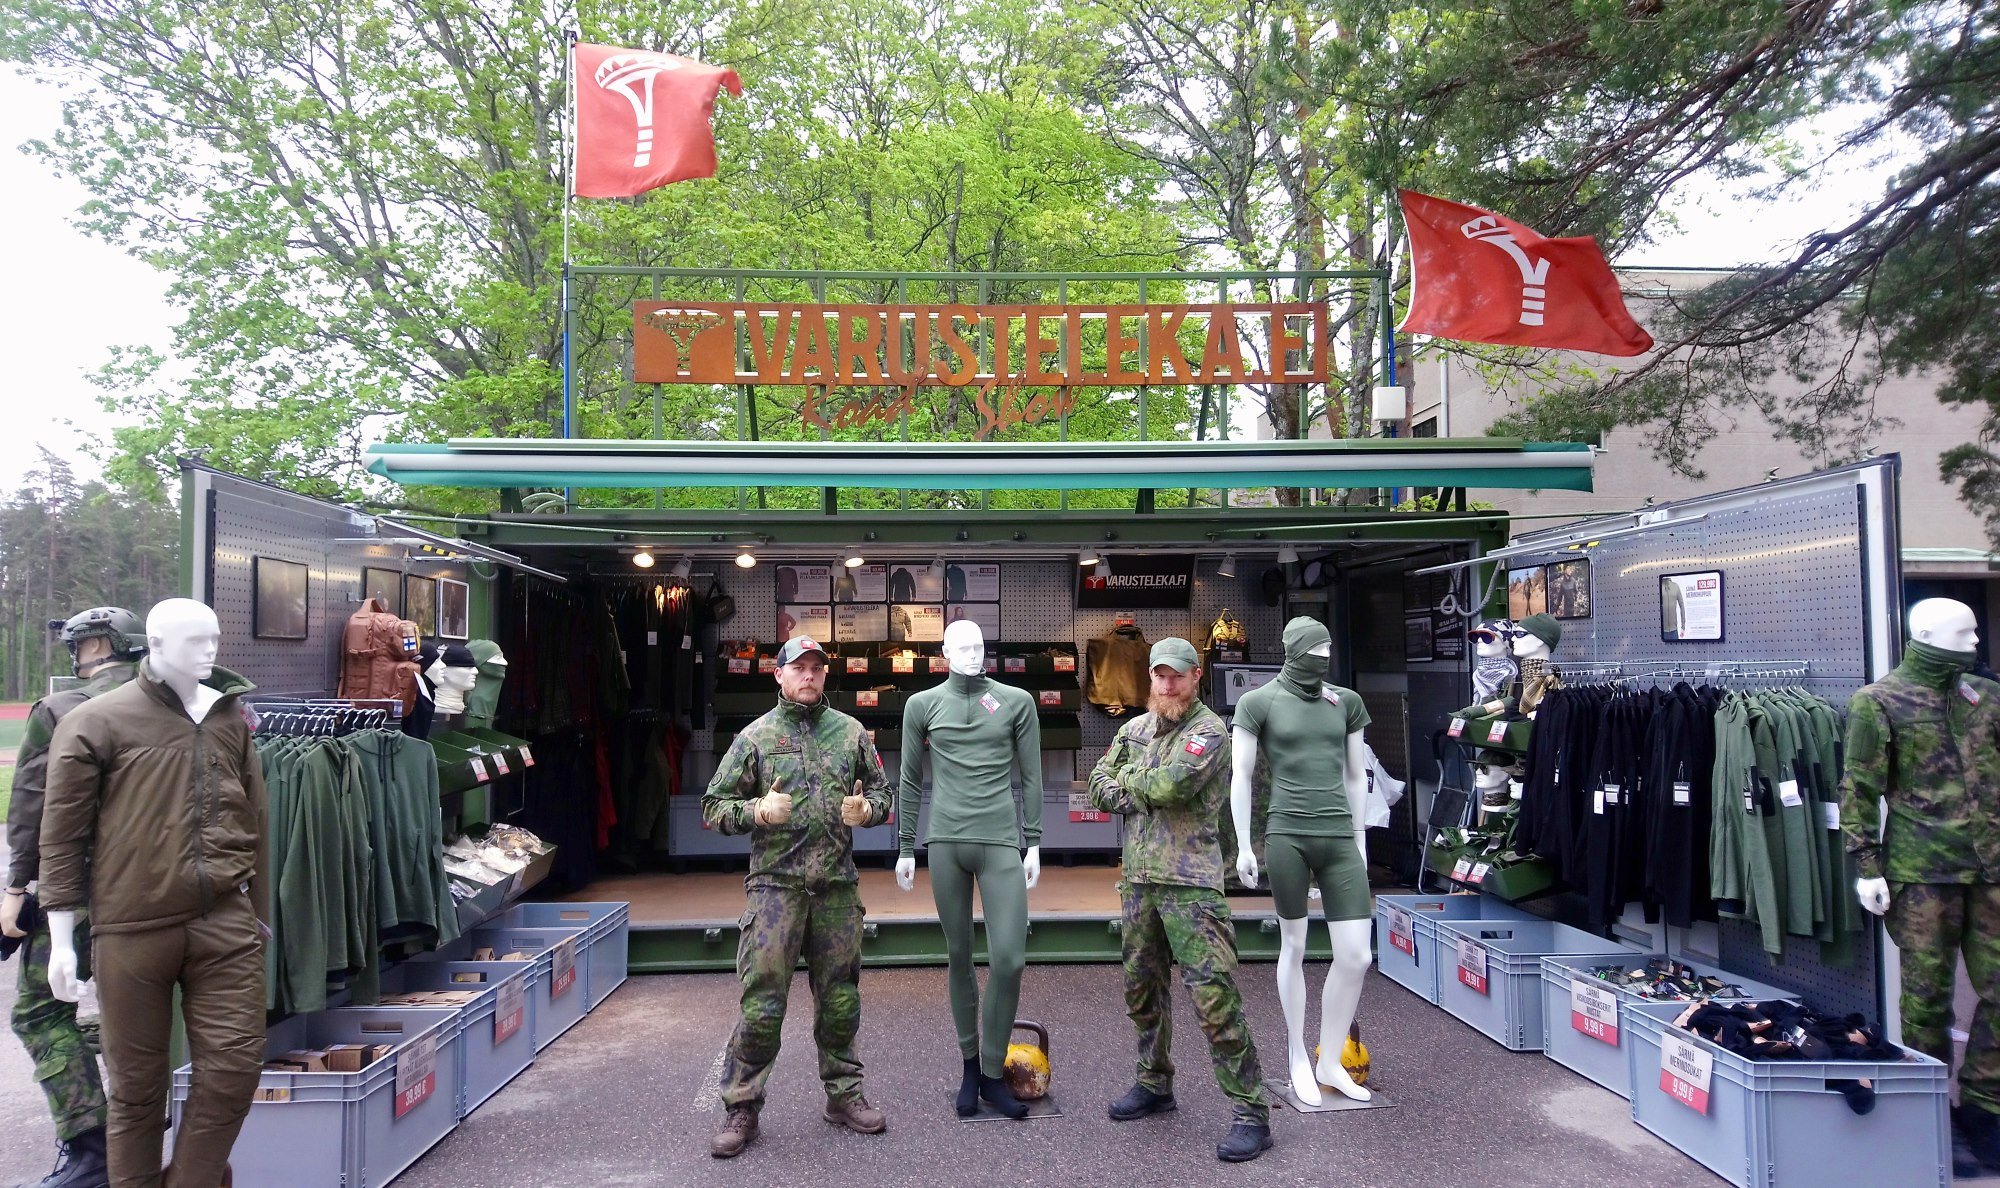 Two gentlemen wearing M05 camo clothing in front of Varusteleka container shop.